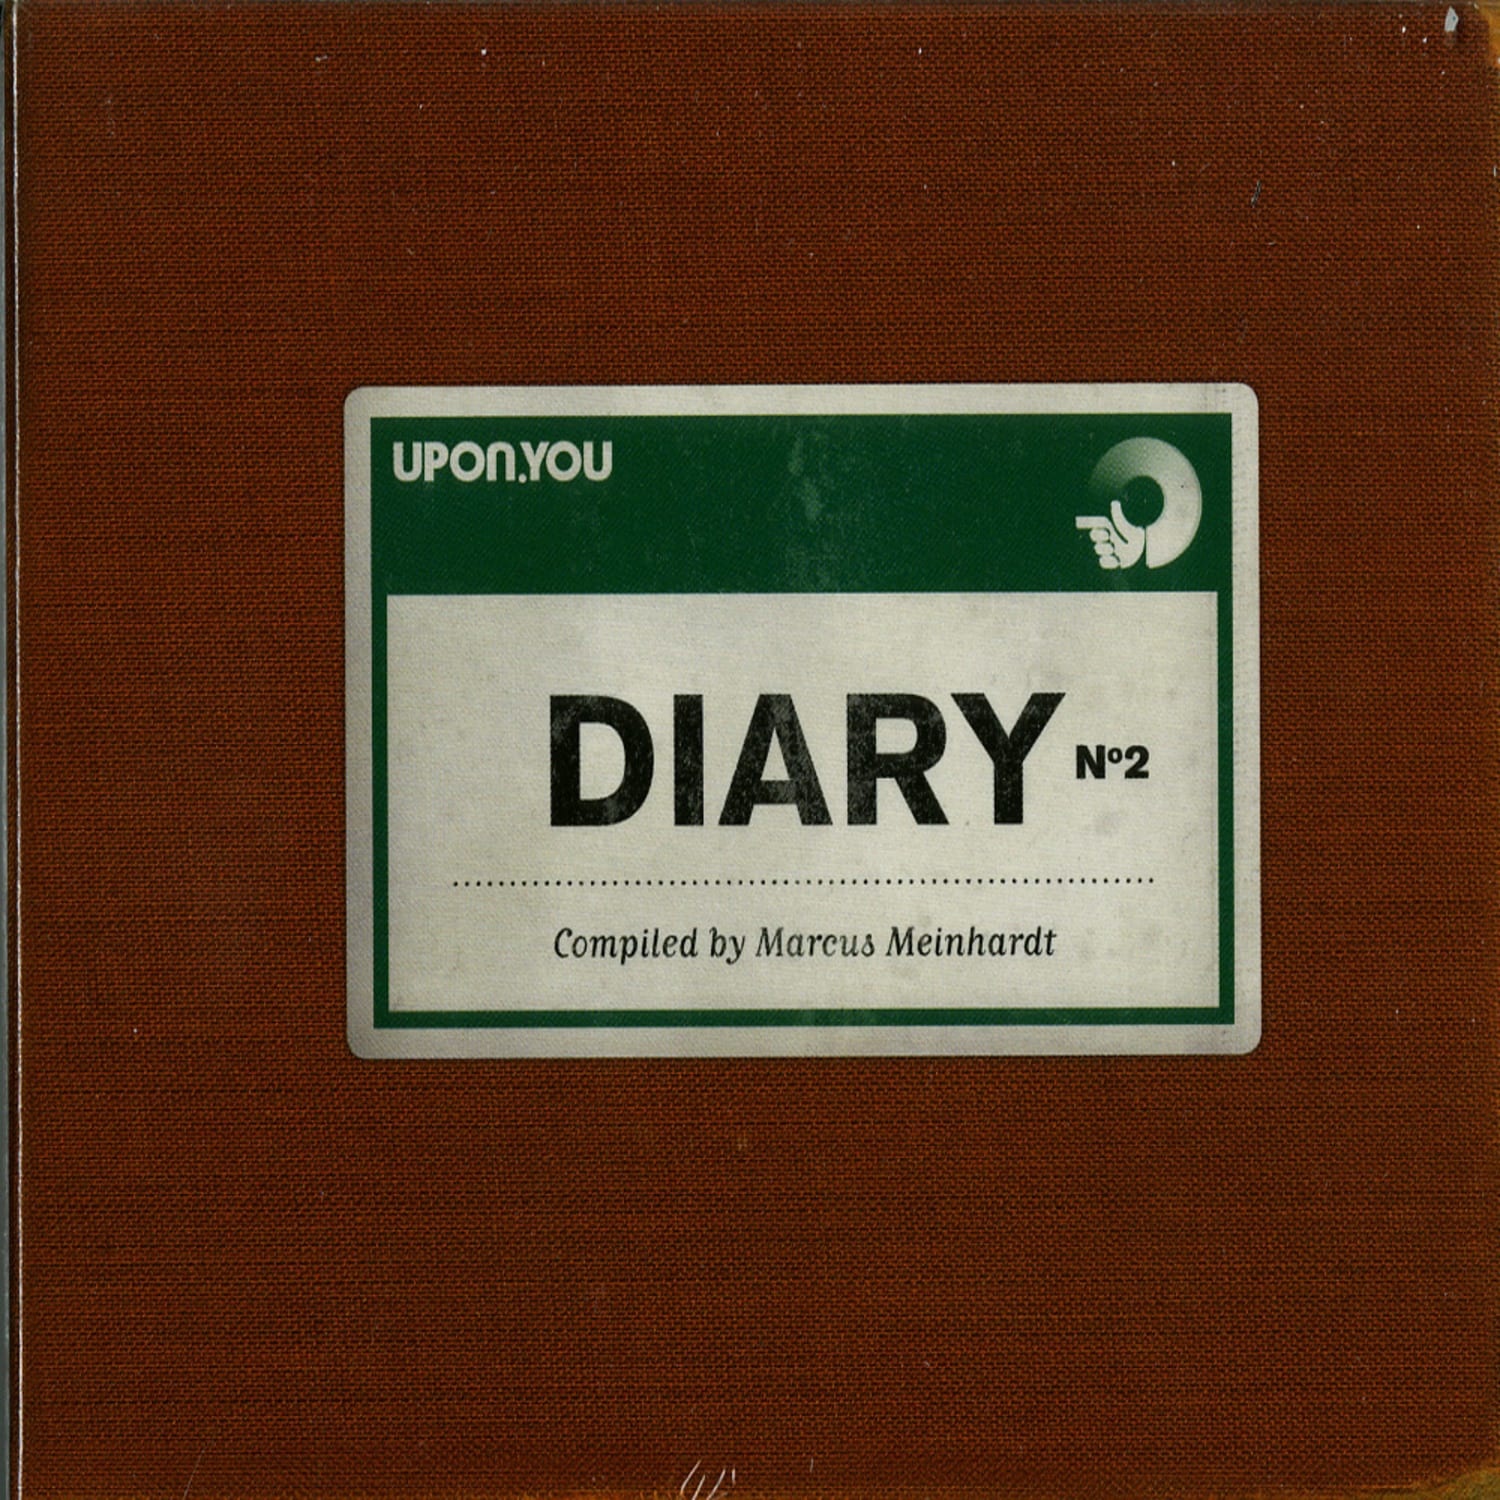 Various Artists compiled By Marcus Meinhardt - UPON YOU DIARY NO 2 